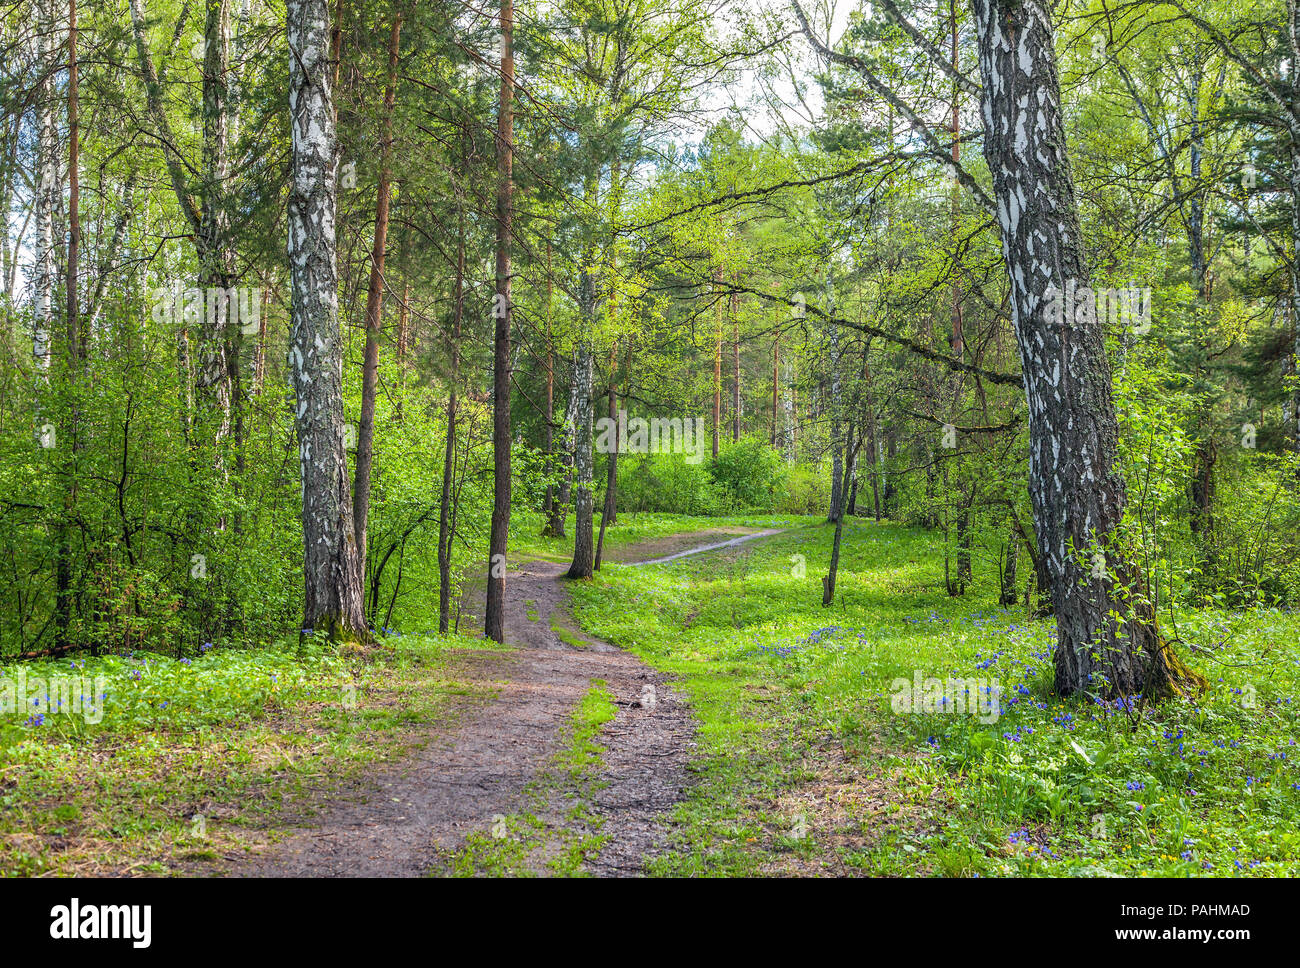 Summer in the Siberian forest. Stock Photo